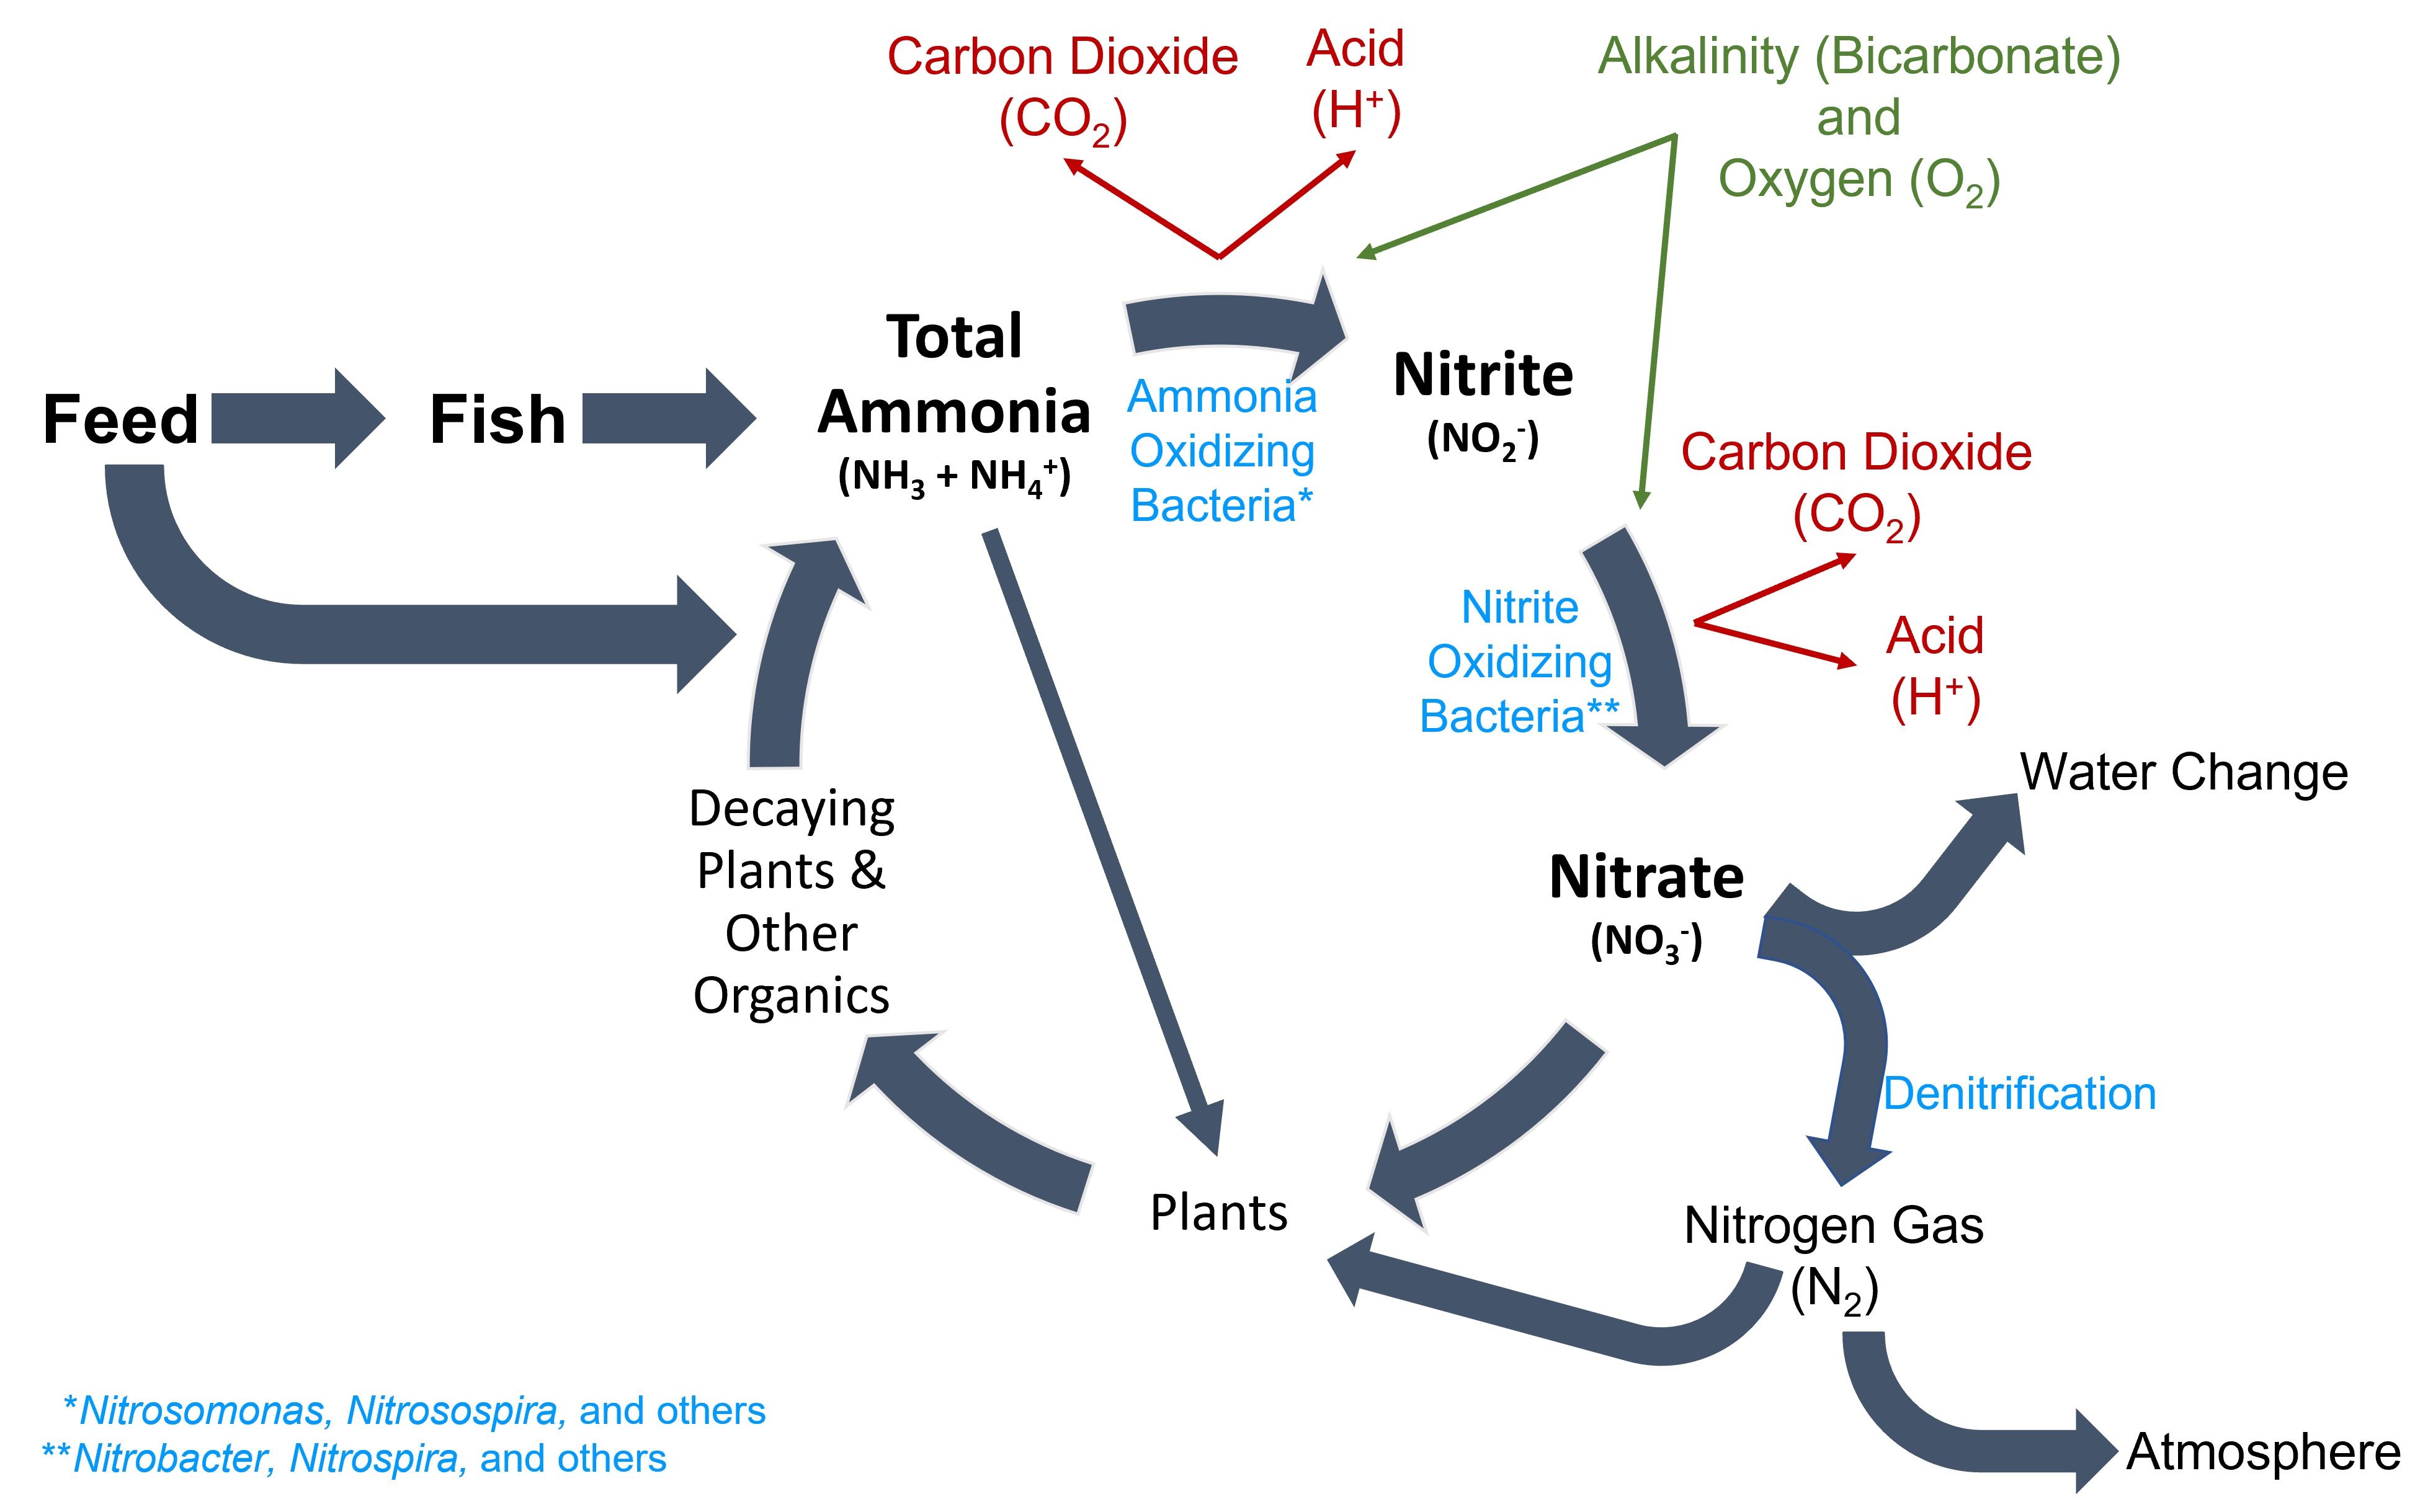 The nitrogen cycle. Ammonia-oxidizing bacteria convert ammonia to nitrite, and nitrite-oxidizing bacteria convert nitrite to nitrate. Nitrate is a less toxic by-product of nitrification and has various fates depending on the type of aquaculture production system. 